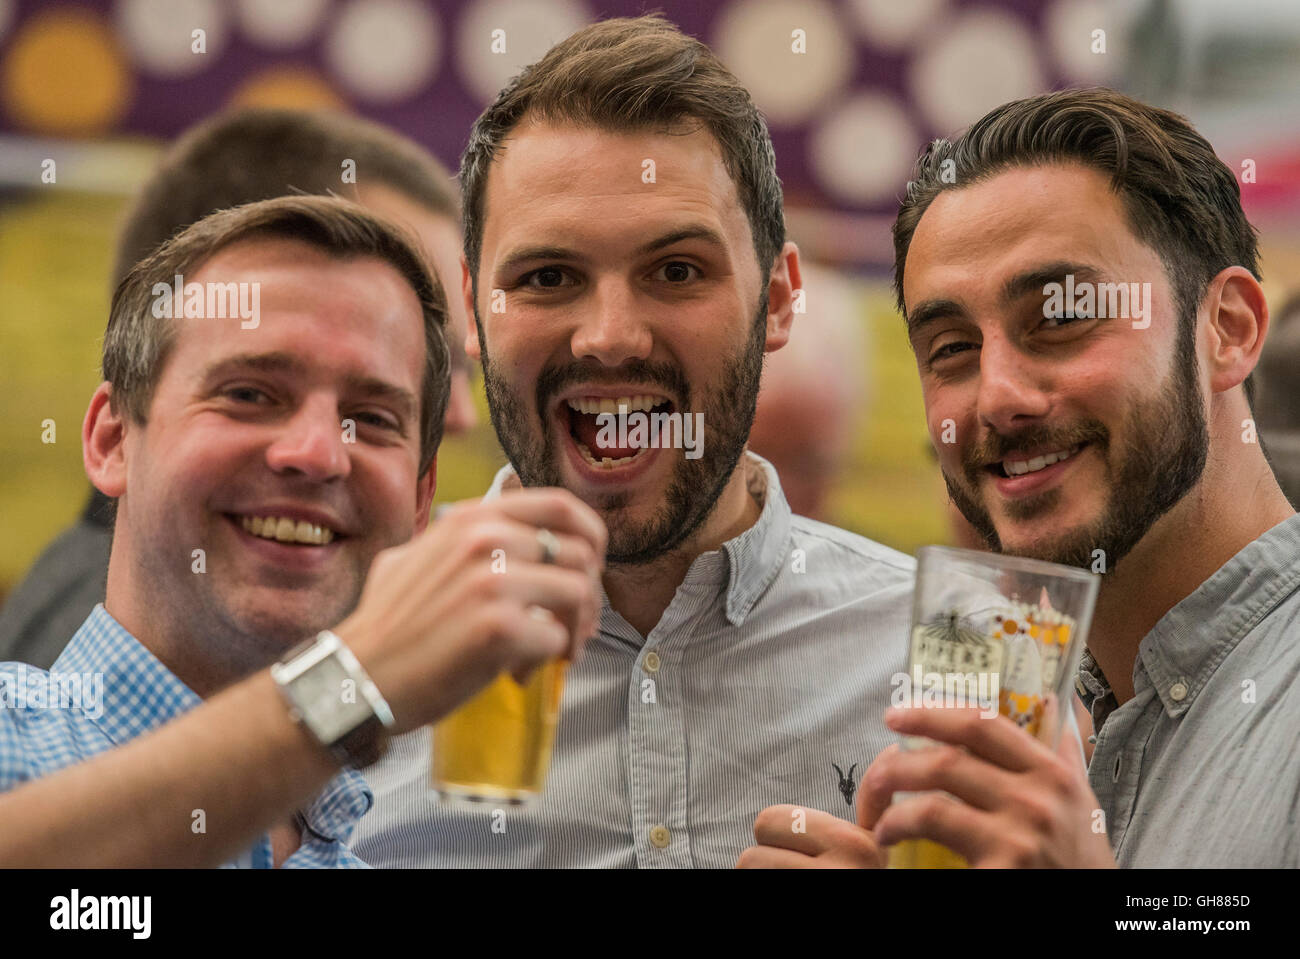 London, UK. 9th August, 2016. The Great British Beer Festival organised by the Campaign for Real Ale (CAMRA) offers visitors over 900 real ales, ciders, perries and international beers at Olympia. Credit:  Guy Bell/Alamy Live News Stock Photo